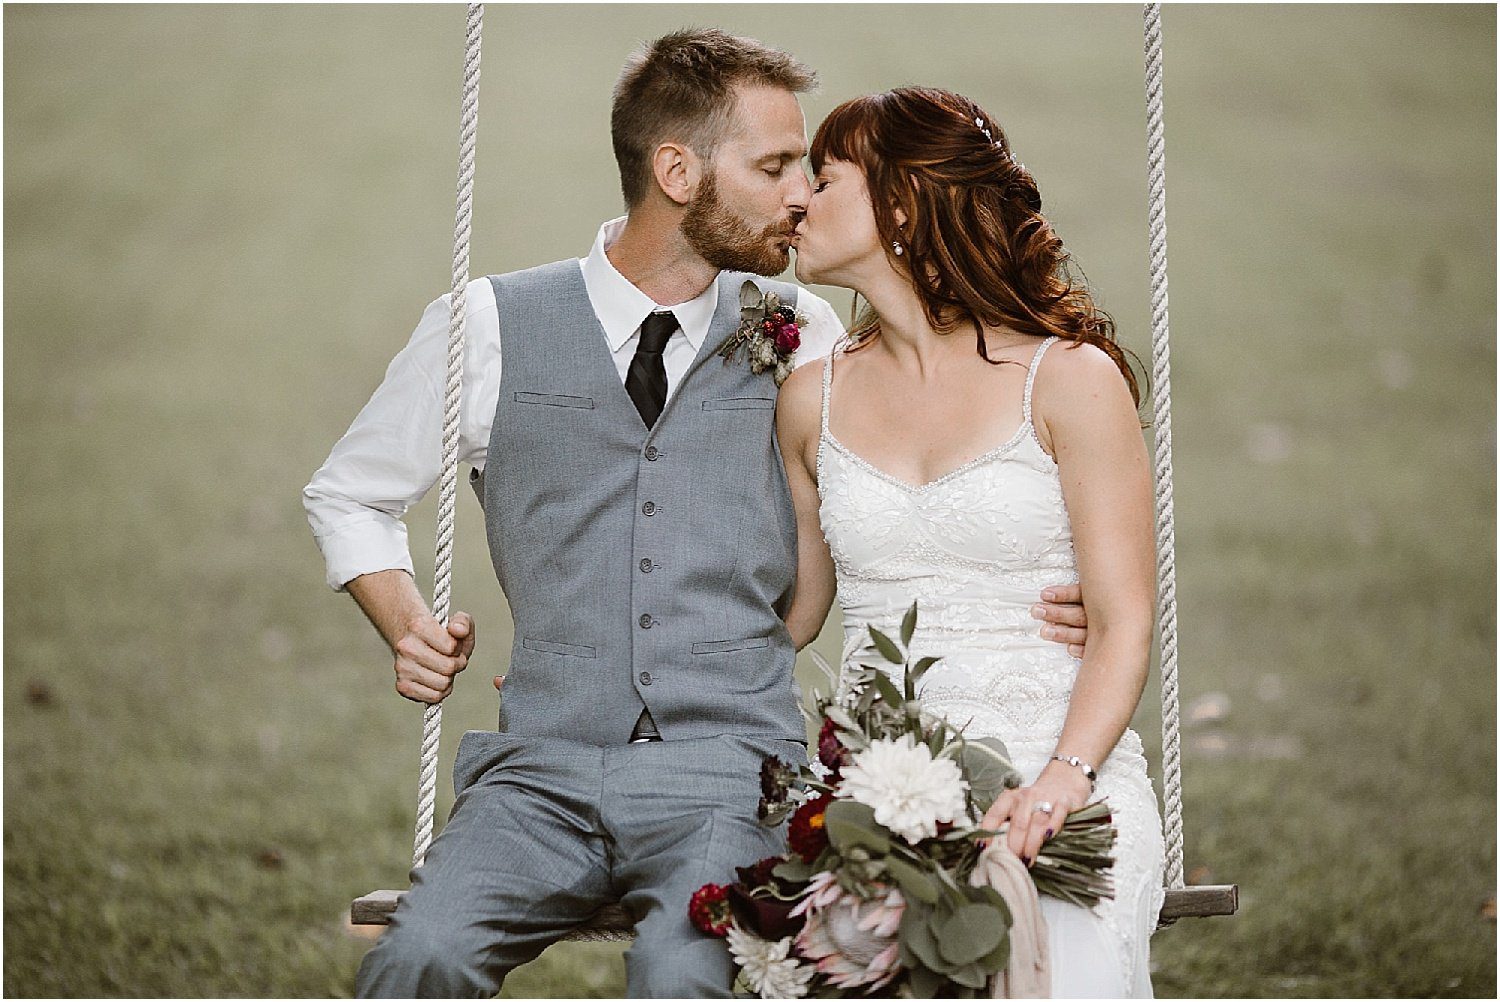 Bride and Groom kissing on swing on wedding day